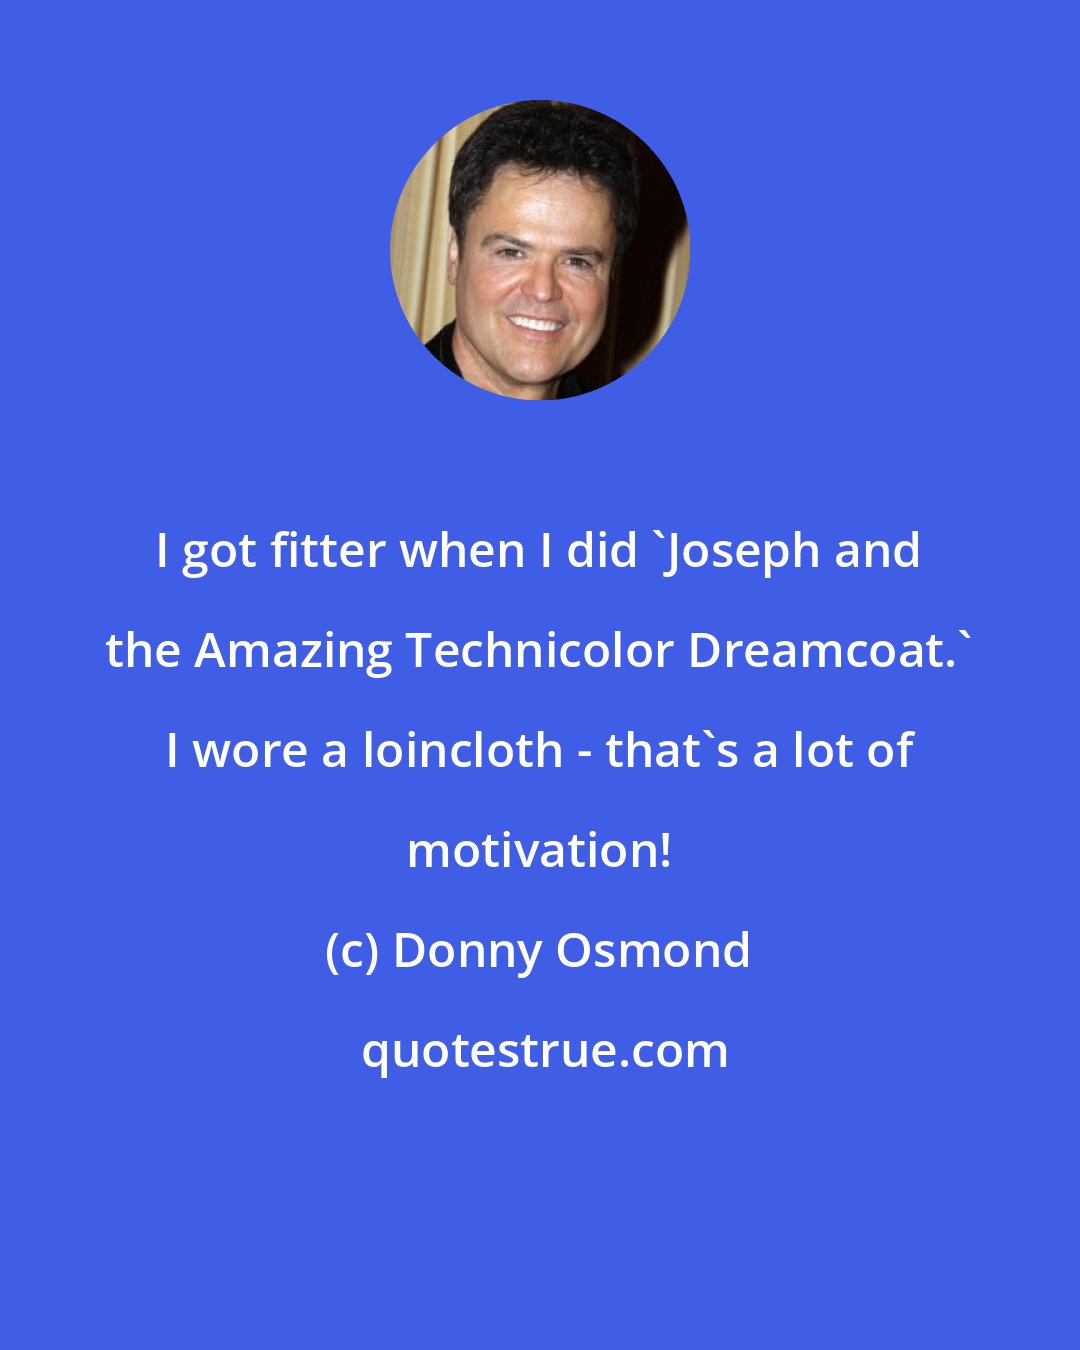 Donny Osmond: I got fitter when I did 'Joseph and the Amazing Technicolor Dreamcoat.' I wore a loincloth - that's a lot of motivation!